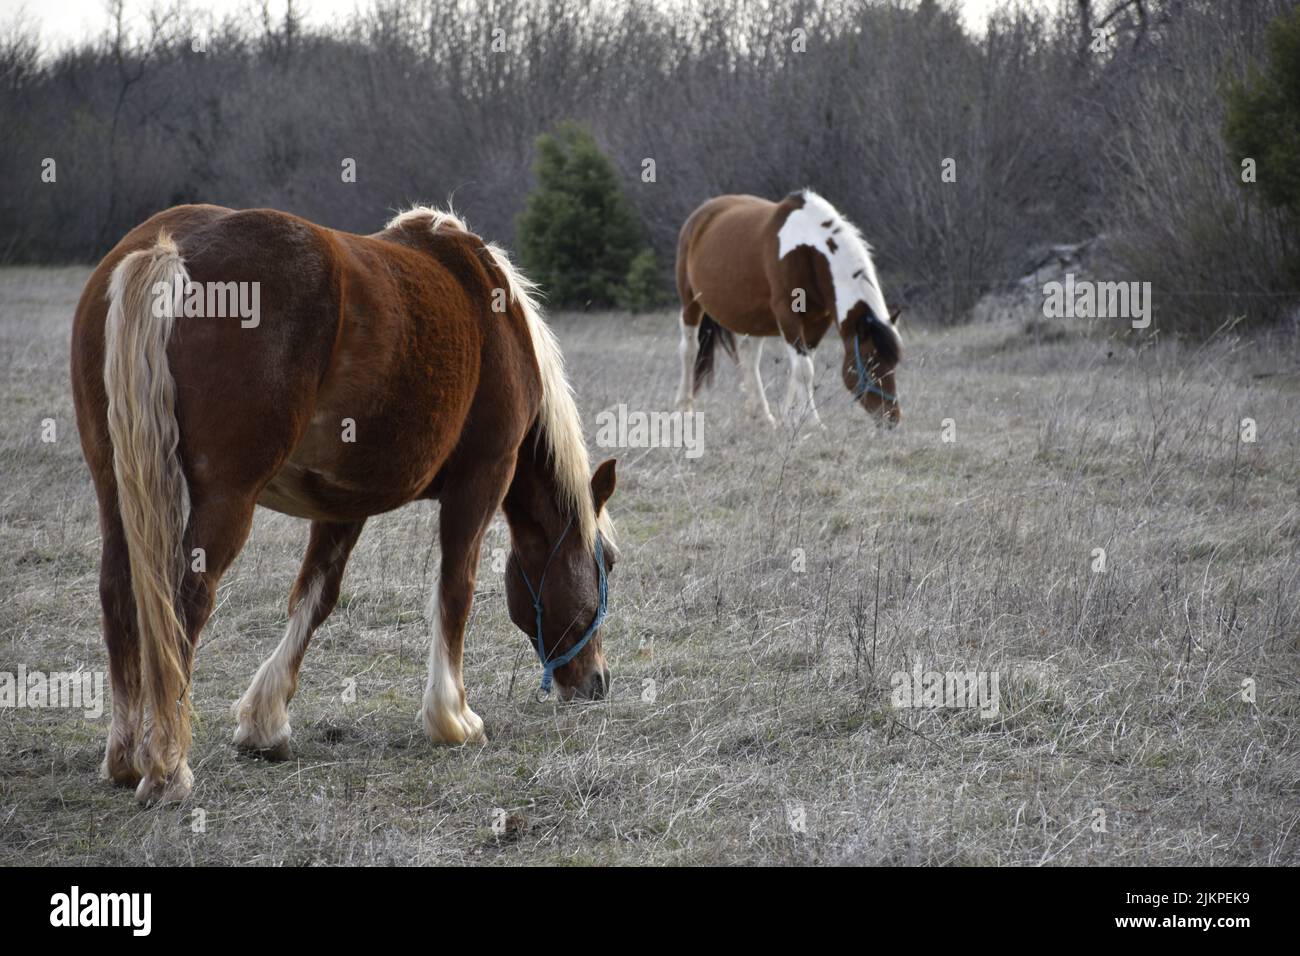 Two horses grazing in the field in the background of leafless trees. Stock Photo